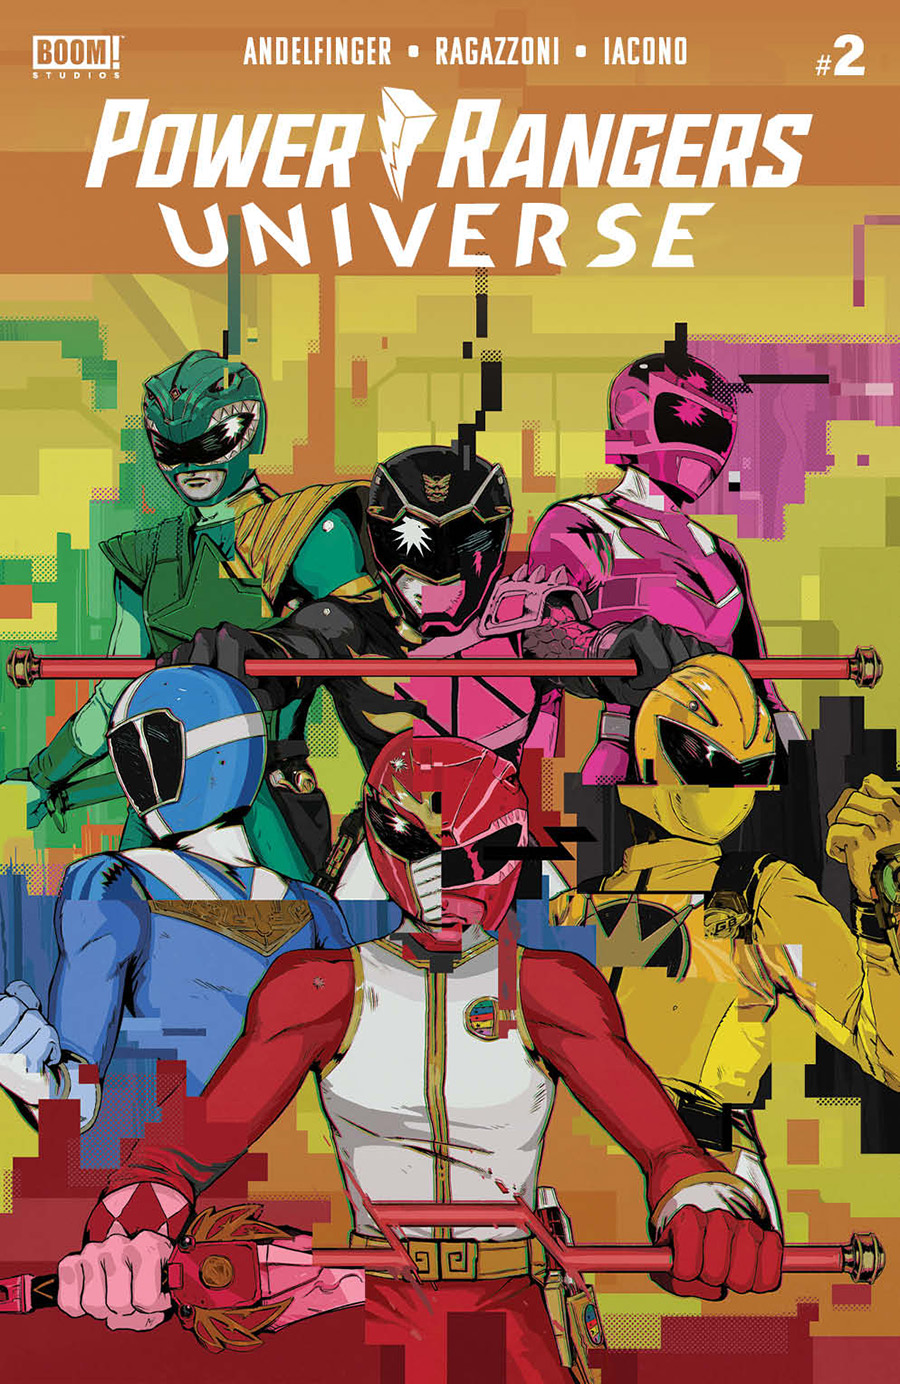 Power Rangers Universe #2 Cover F Variant Songmuang Chuaynukoon Reveal Cover